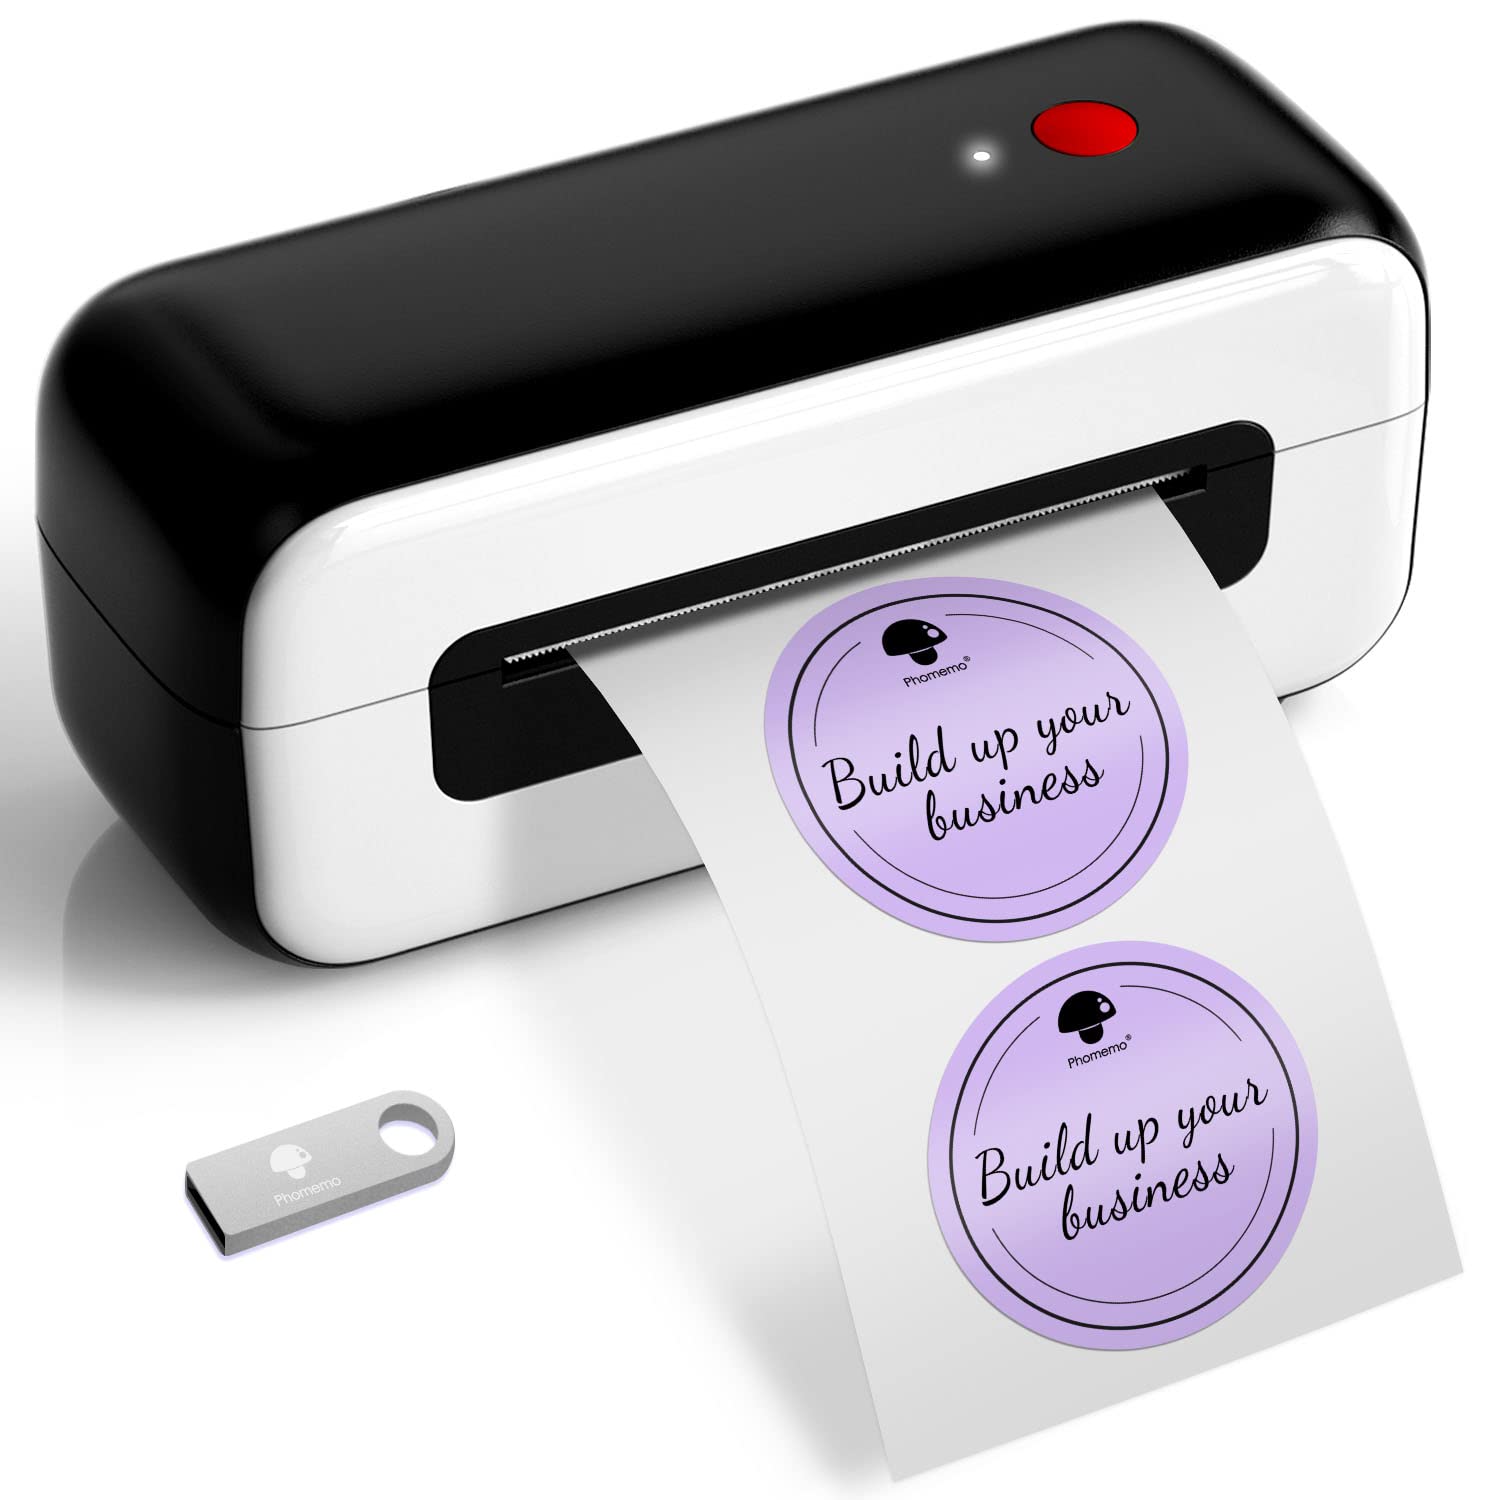 Imprimante Photo Portable Apple – The Ultimate Printing Solution For Your Home Or Office